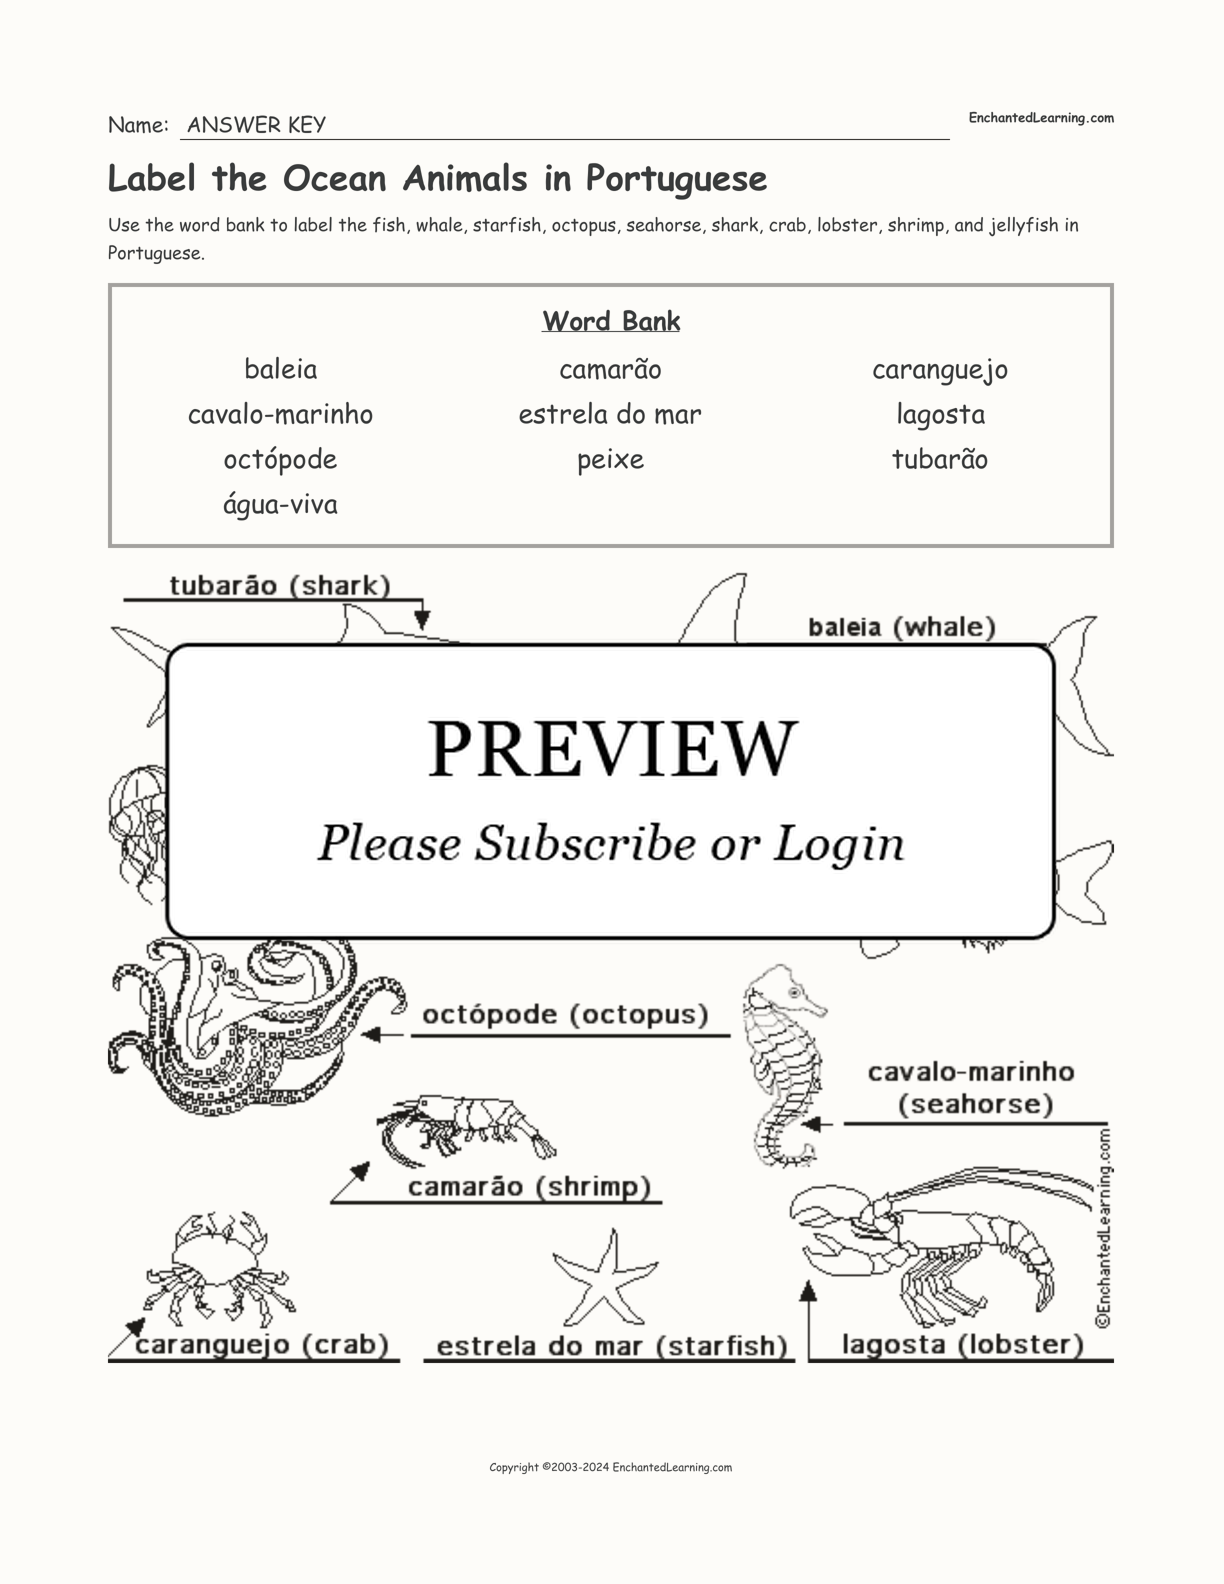 Label the Ocean Animals in Portuguese interactive worksheet page 2